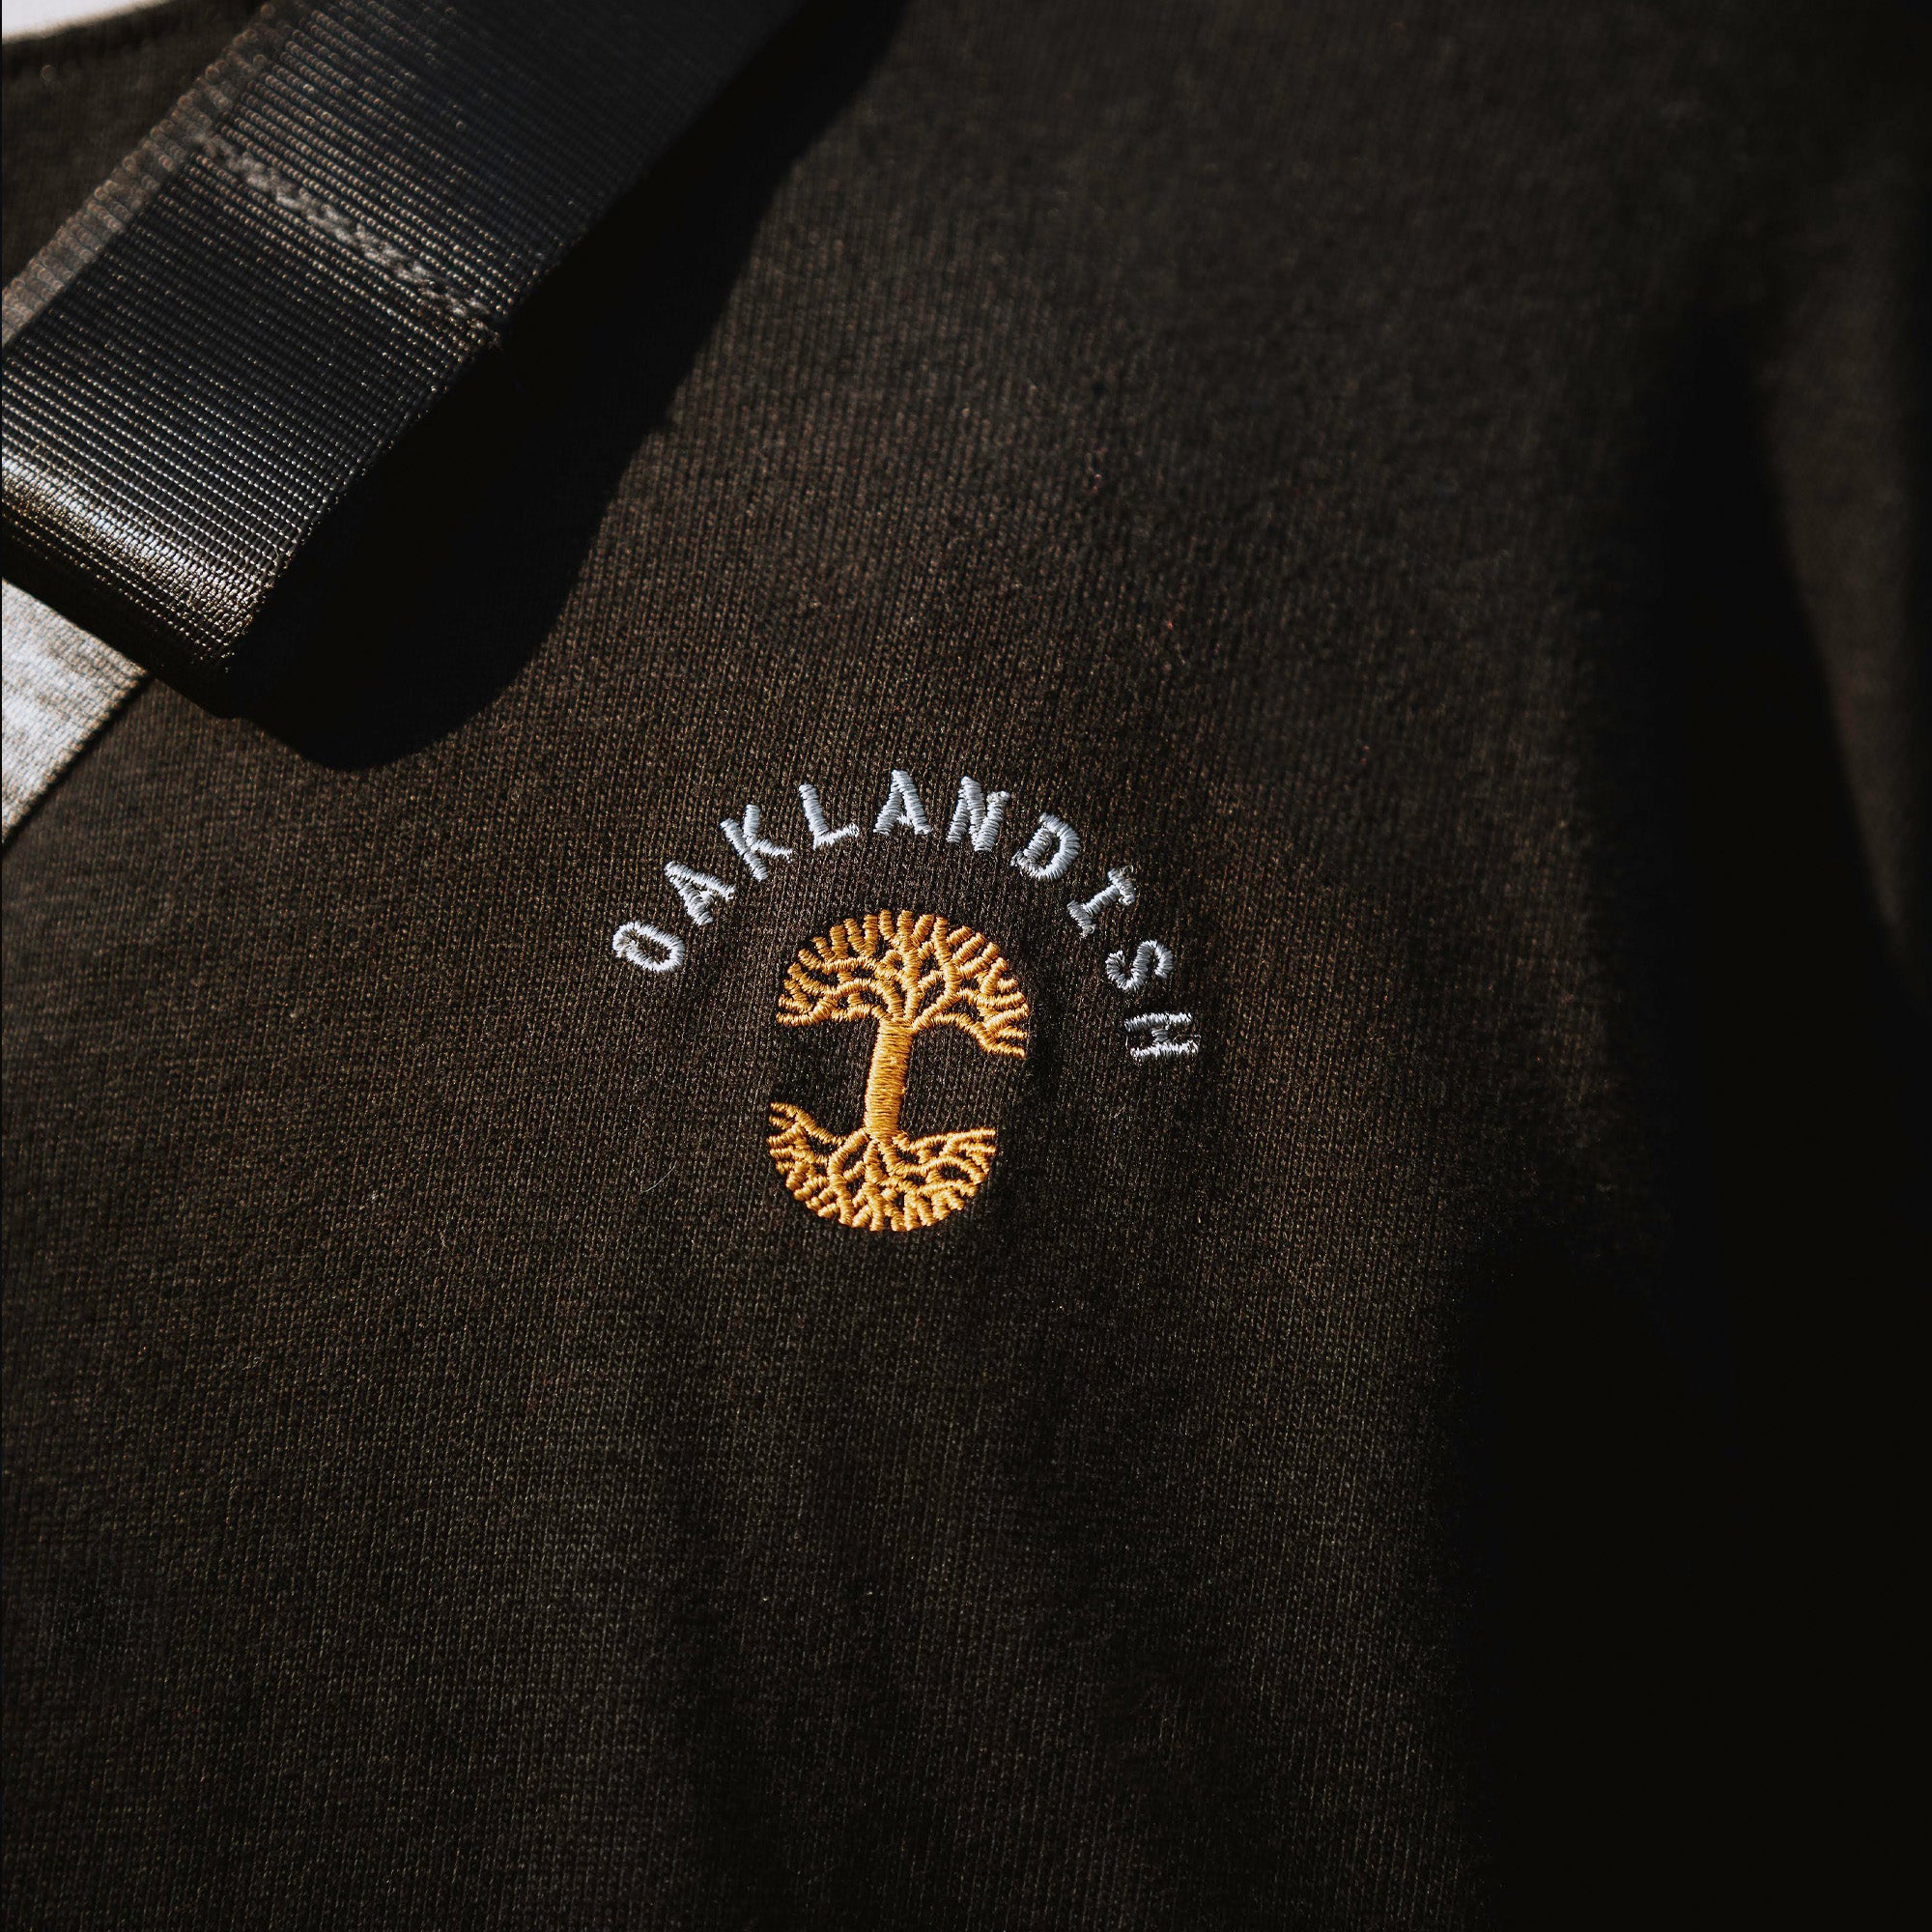 Close-up on model  of embroidered gold Oaklandish tree logo, white wordmark on the chest of a black long-sleeve t-shirt.